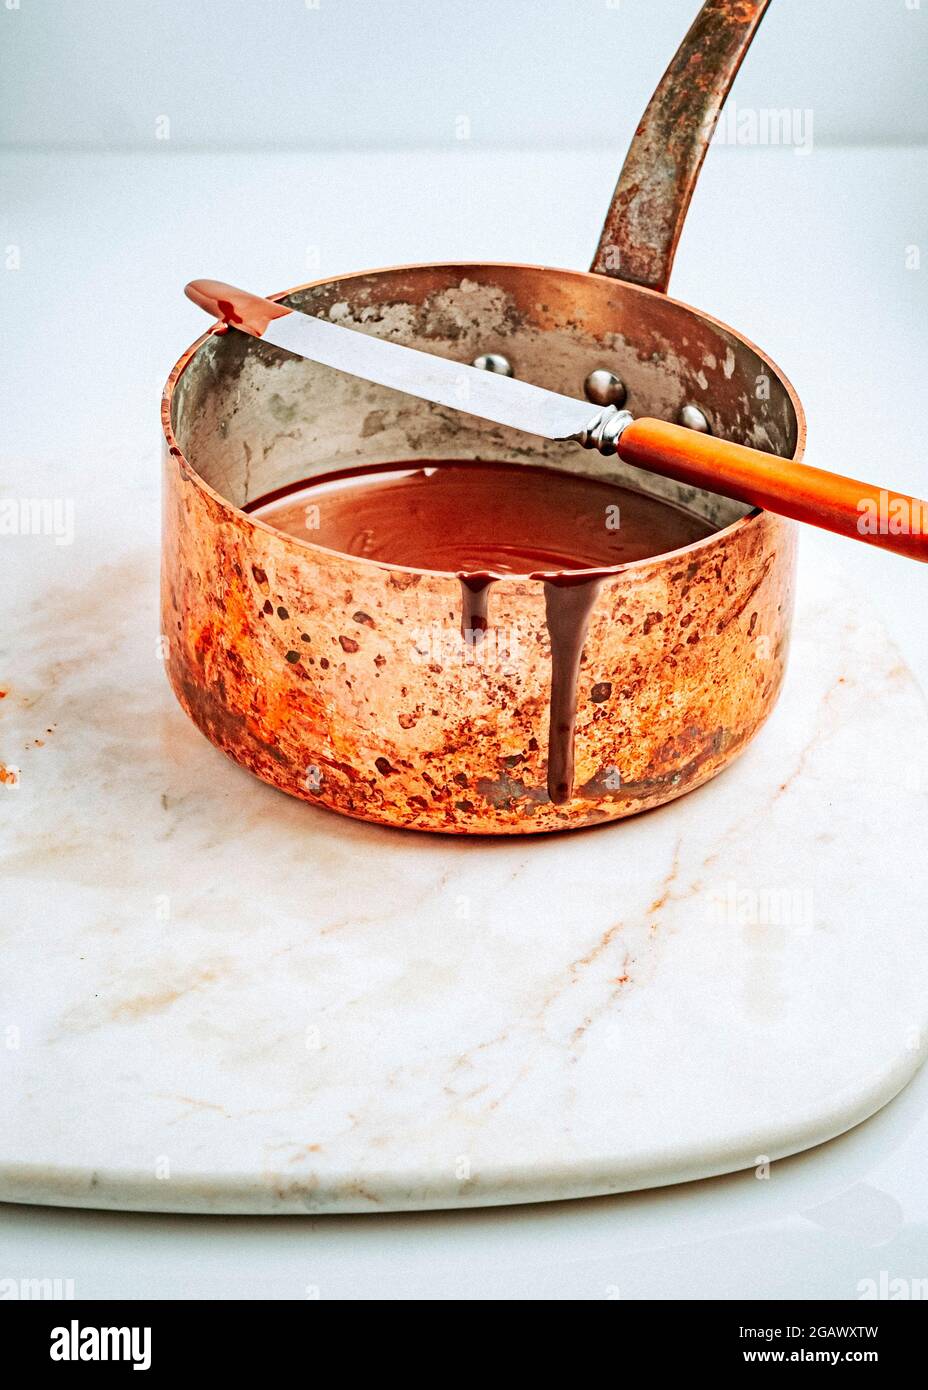 Melting Chocolate in Copper Saucepan Stock Photo